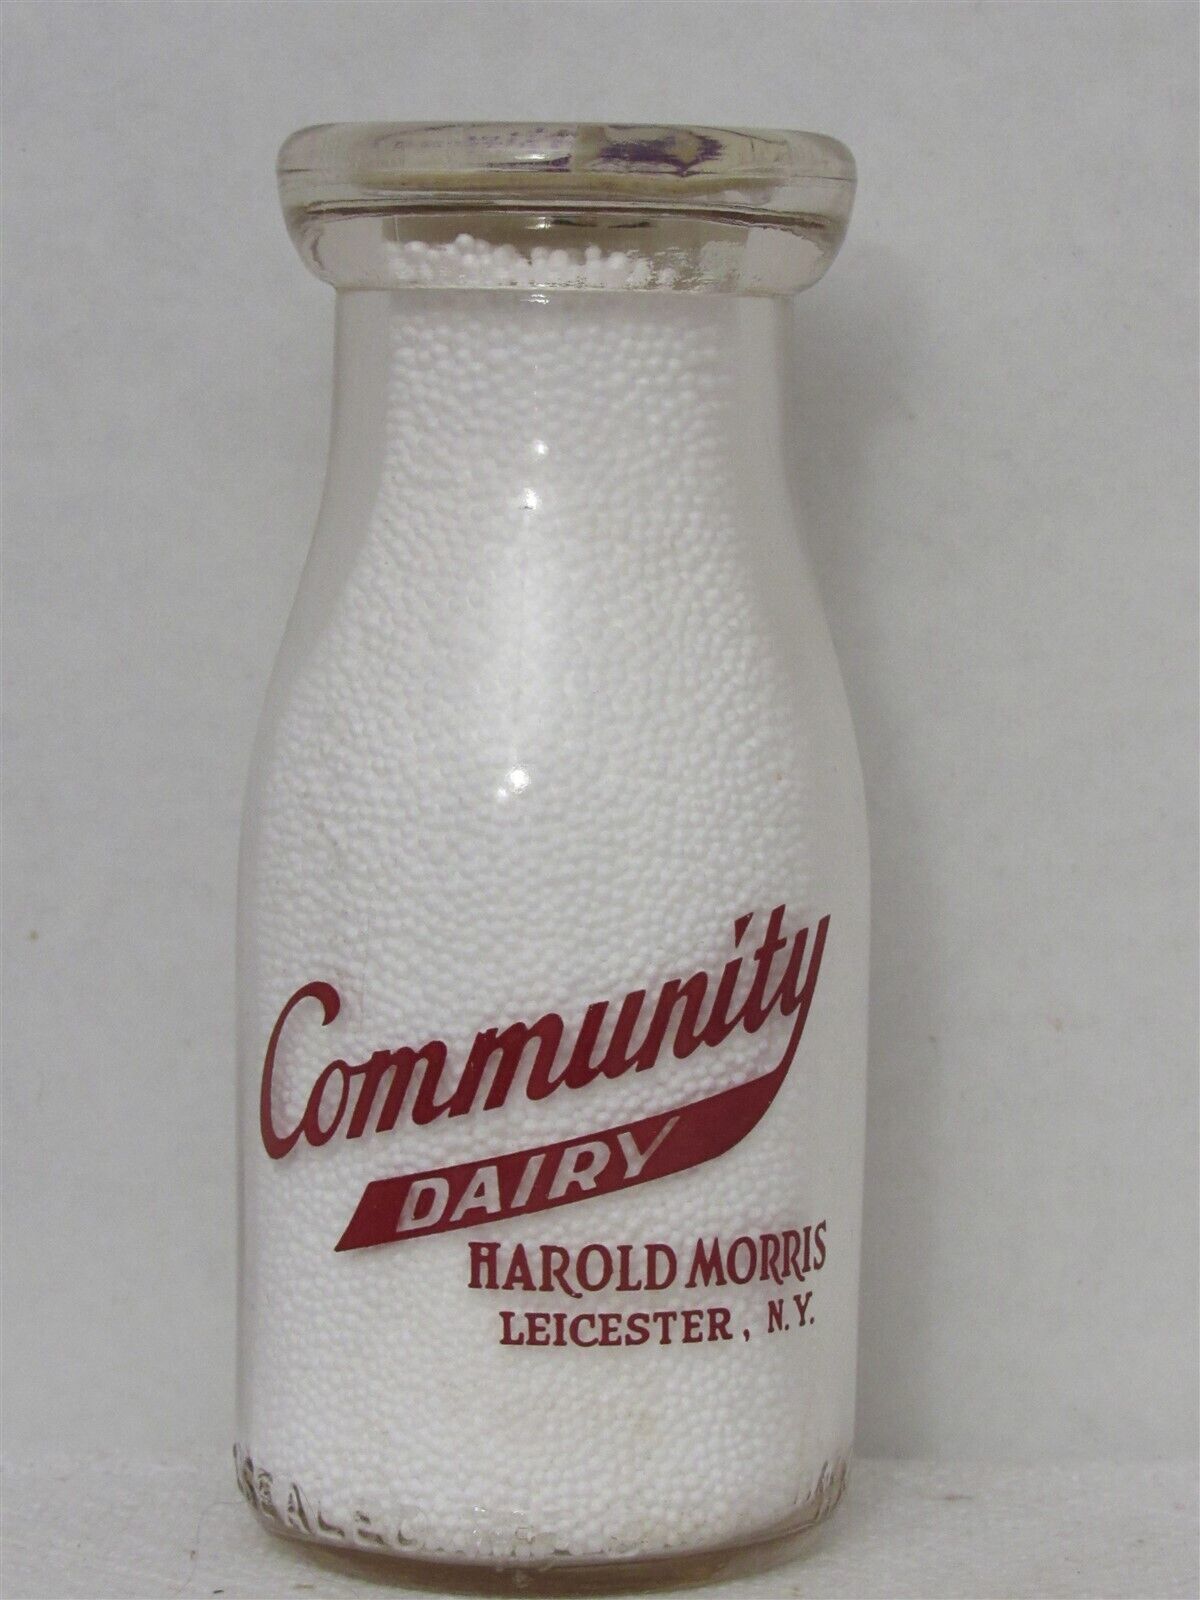 TRPHP Milk Bottle Community Dairy Harold Morris Farm Leicester NY Timely Treat